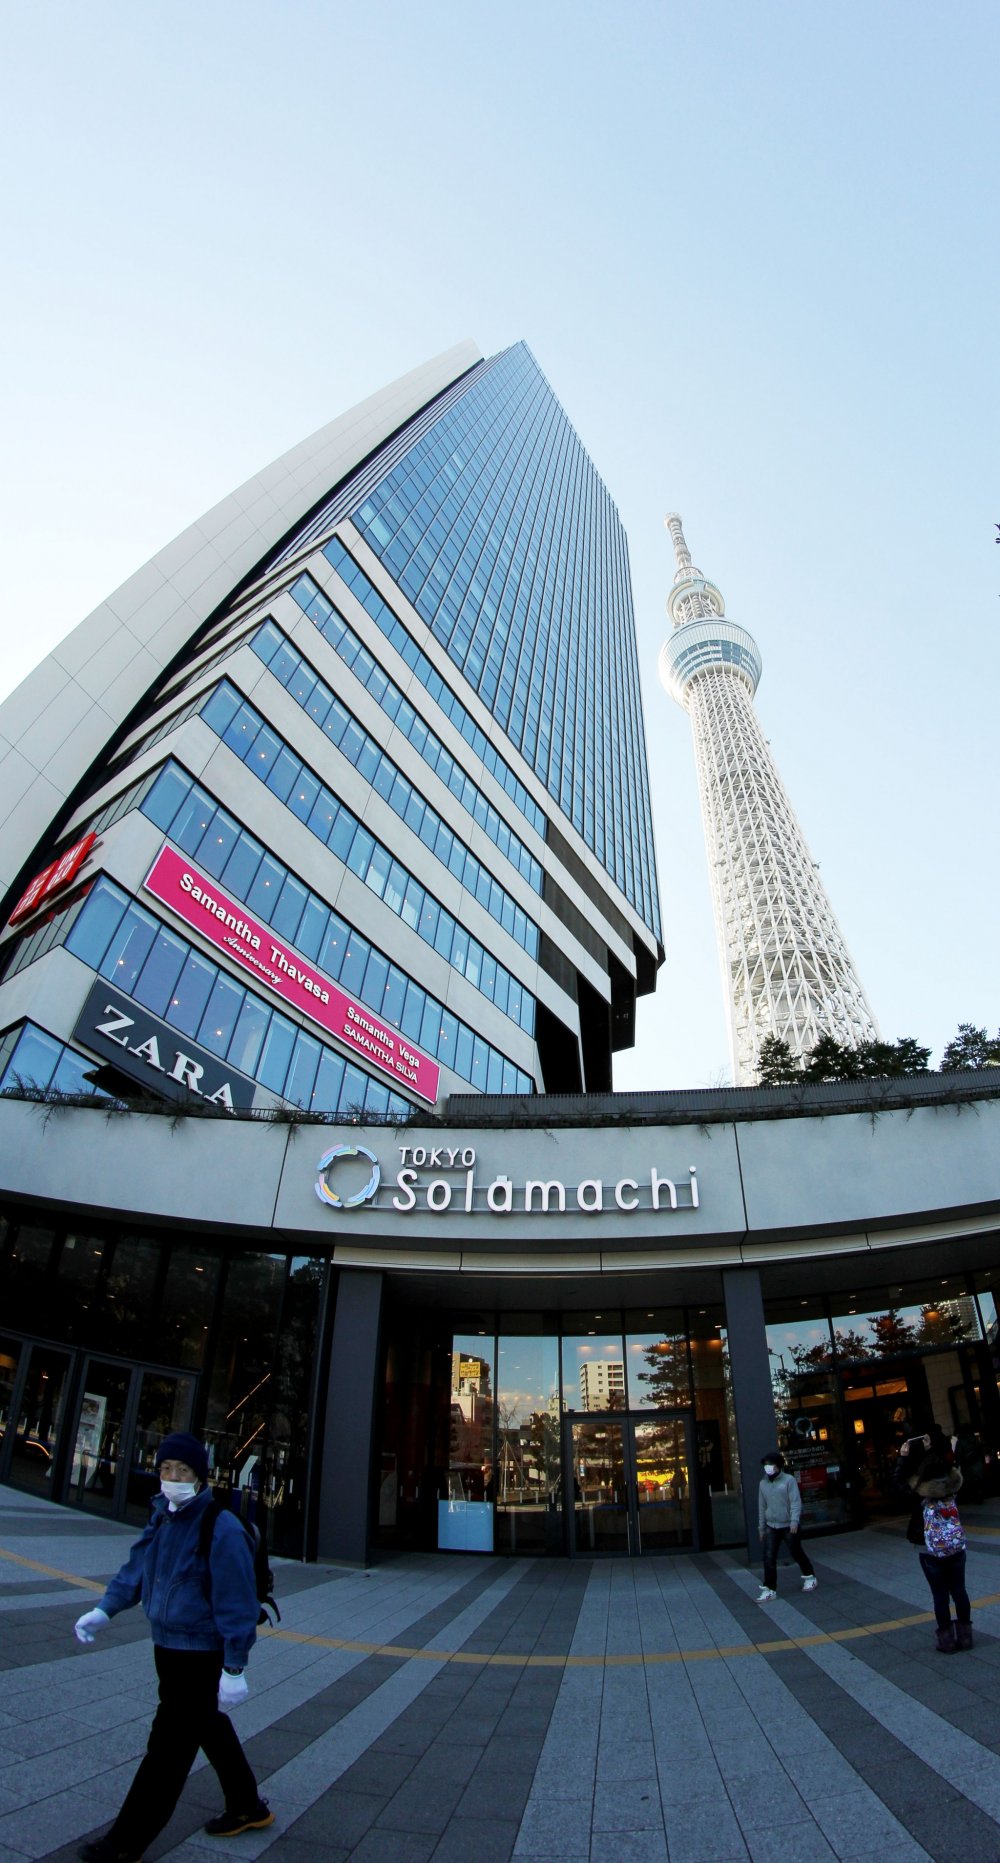 The view from the front of the shopping mall under the Tokyo Skytree building!&nbsp;